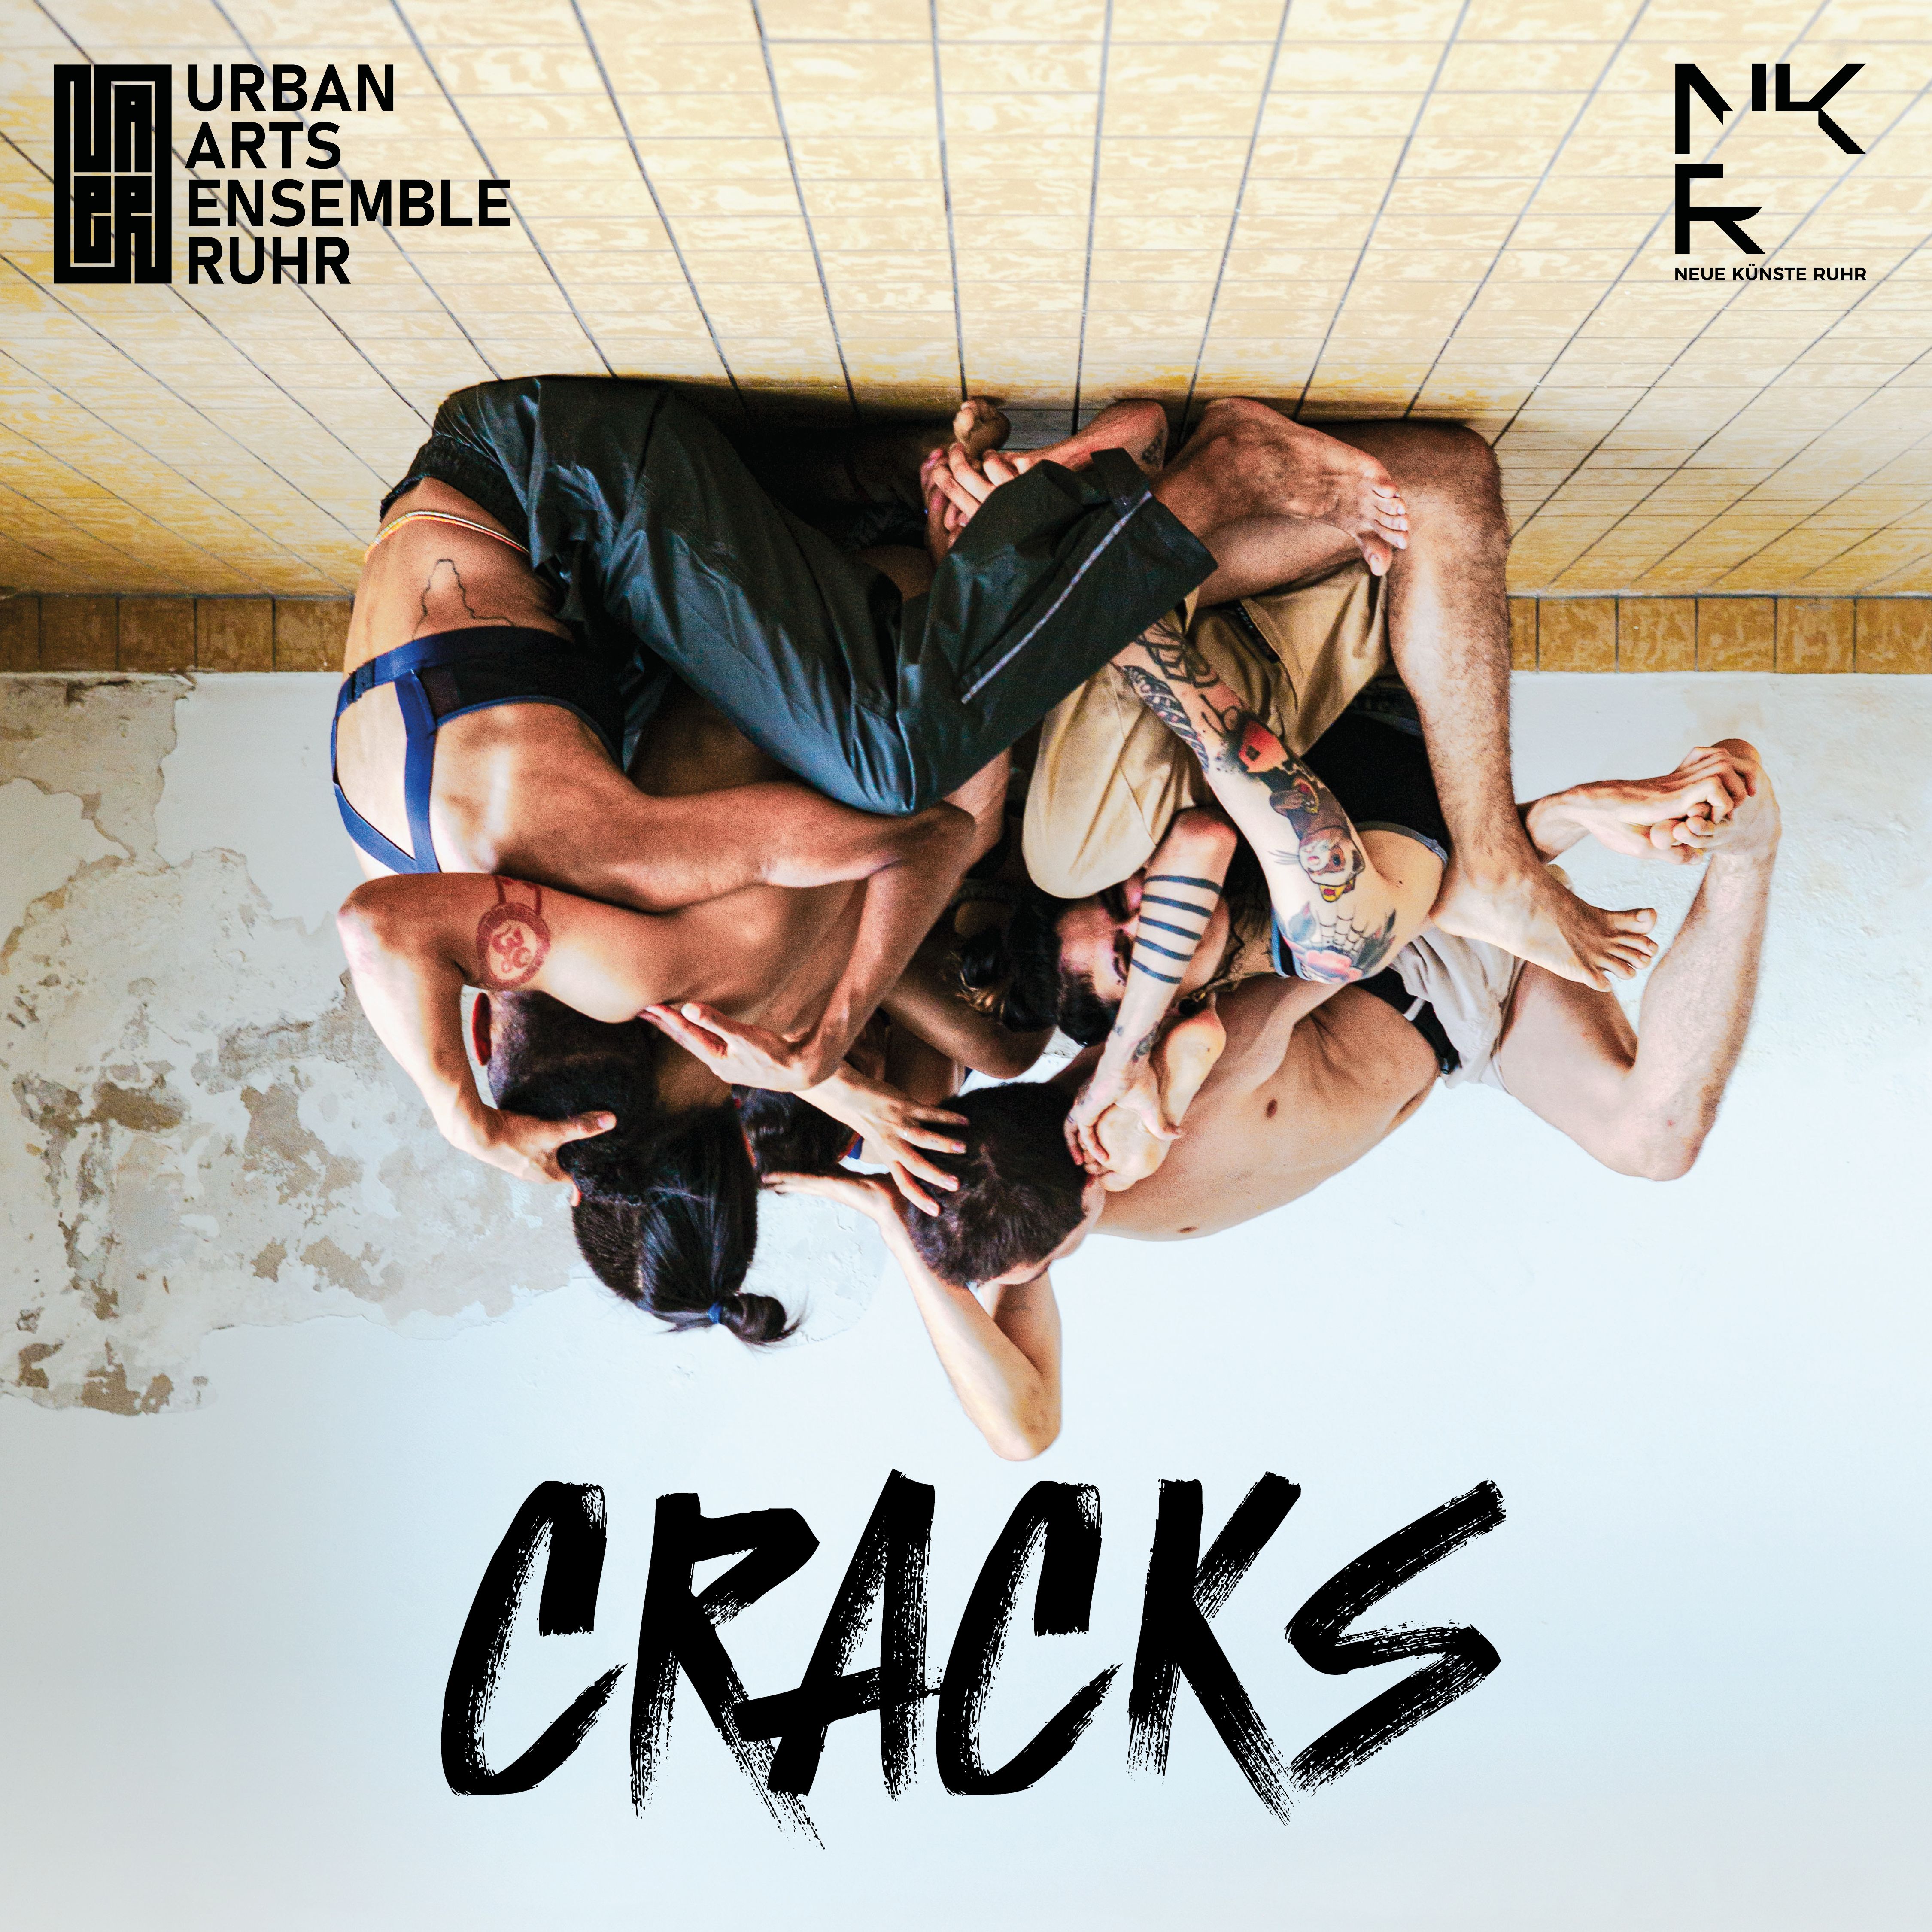 The photo shows dancers sitting on the floor and interlocked with each other. Underneath is the title CRACKS. 